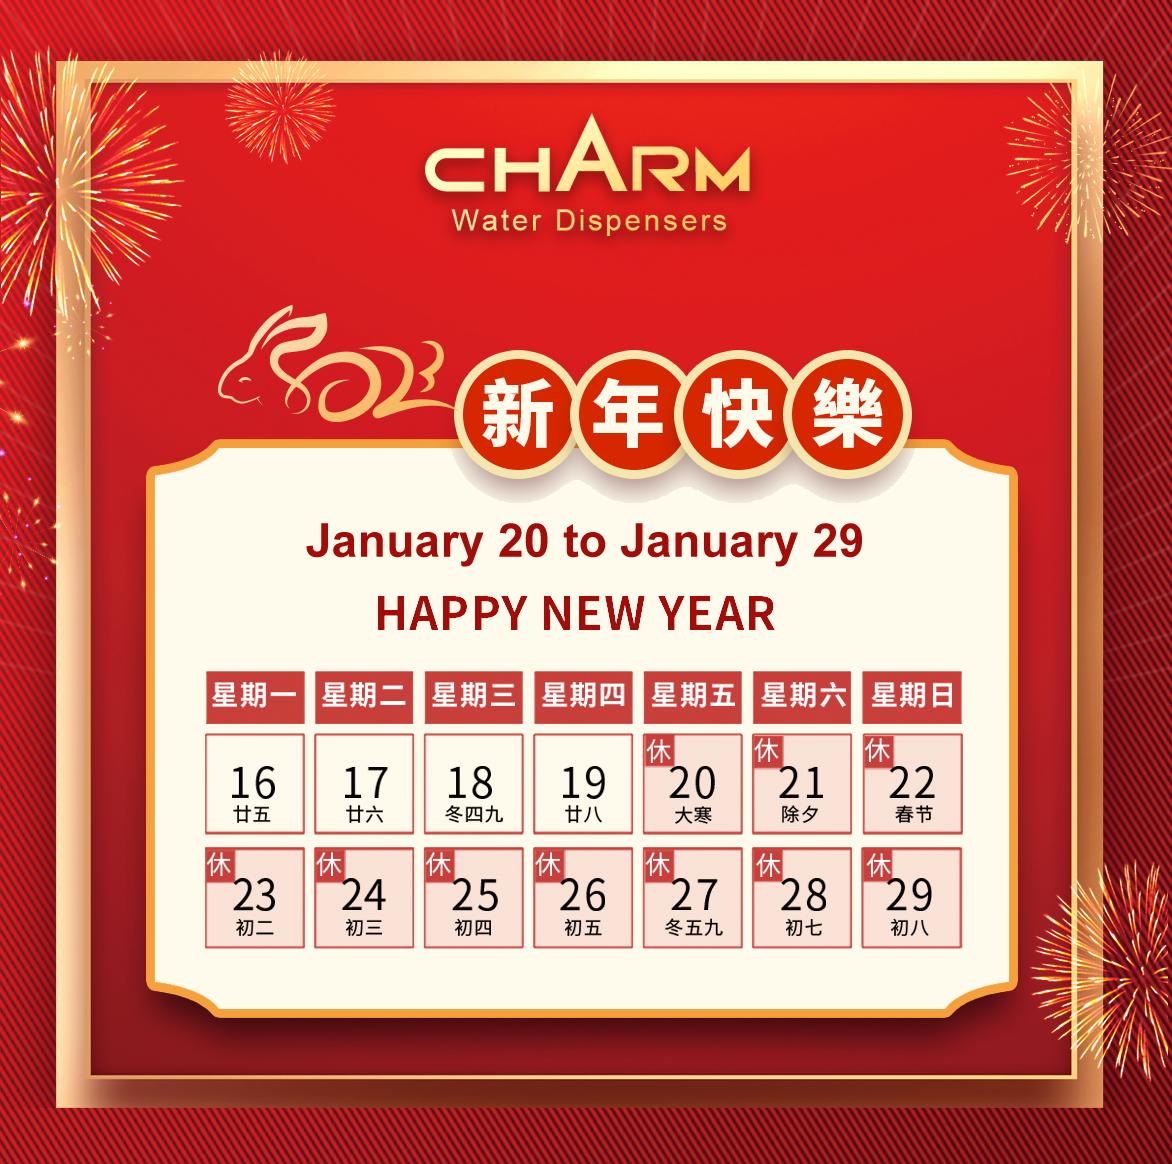 Factory and office will be closed for CNY from Jan 20th to Jan 29th, 2023